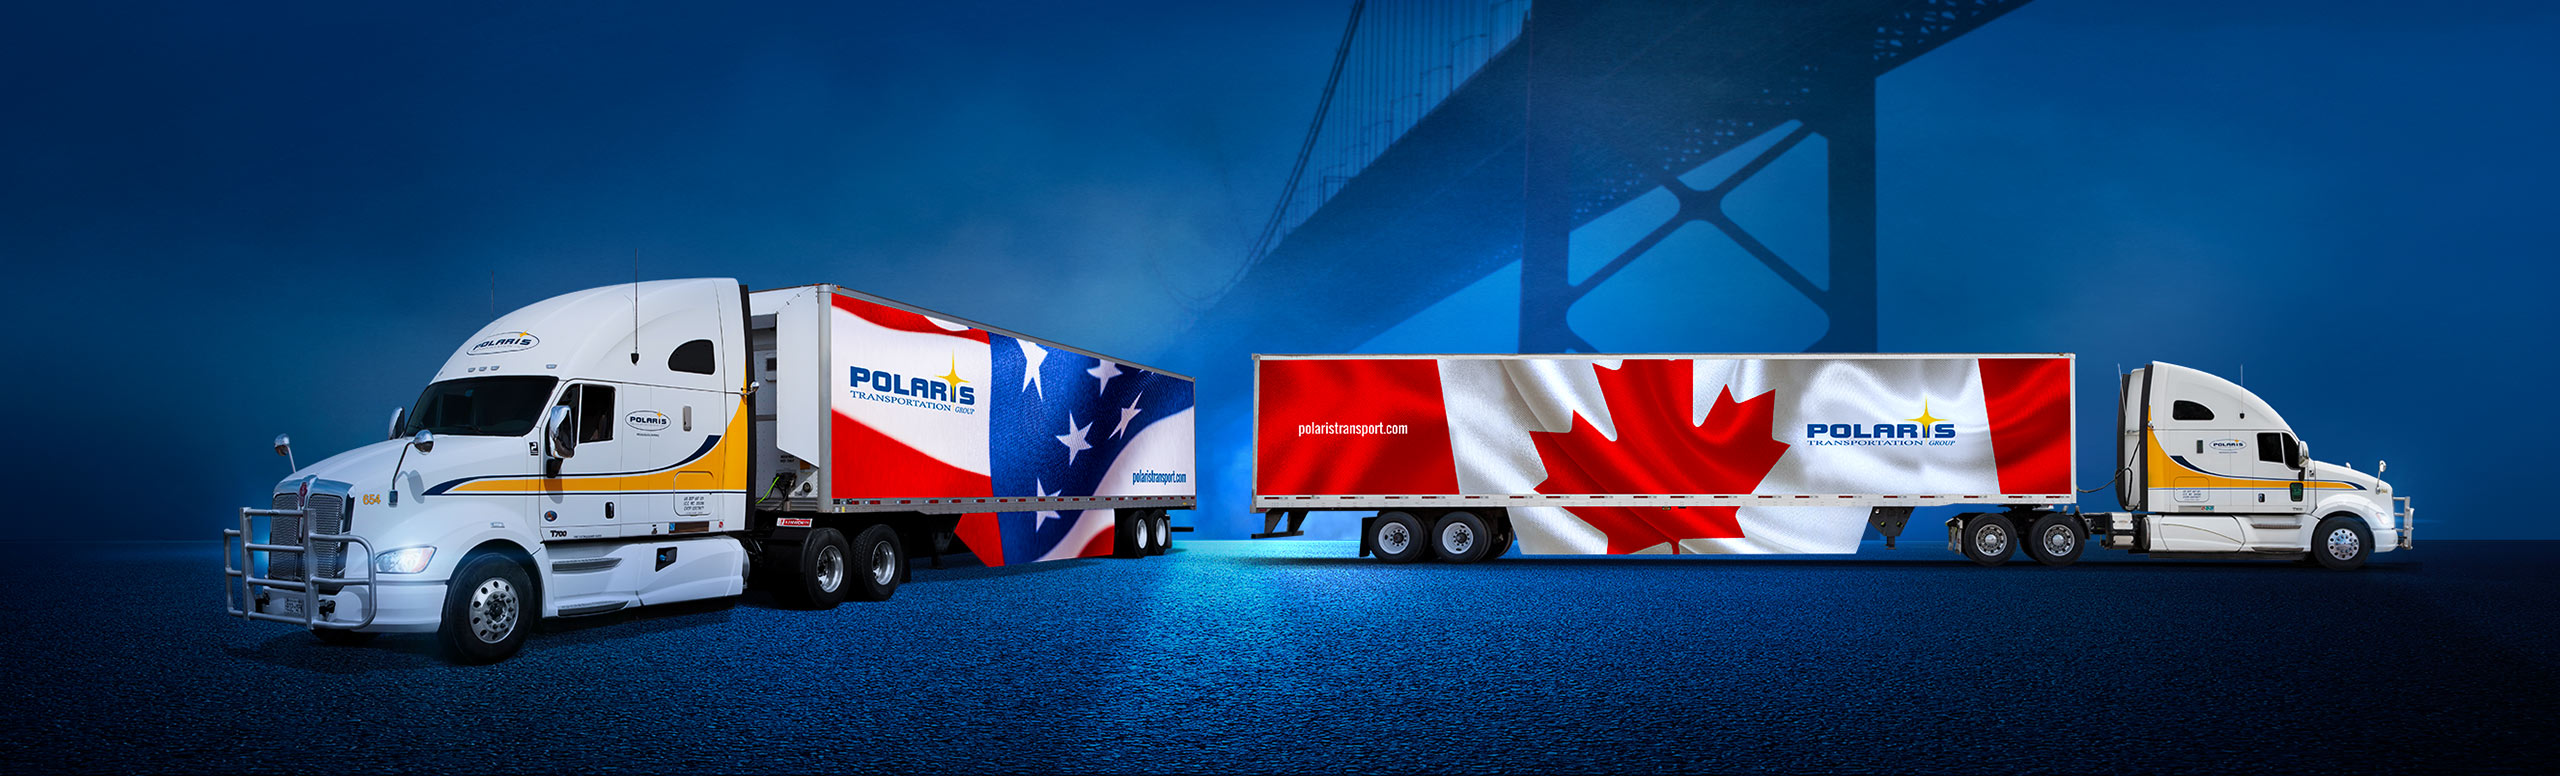 One Polaris truck with U.S. flag on trailer and another with Canada flag on trailer 